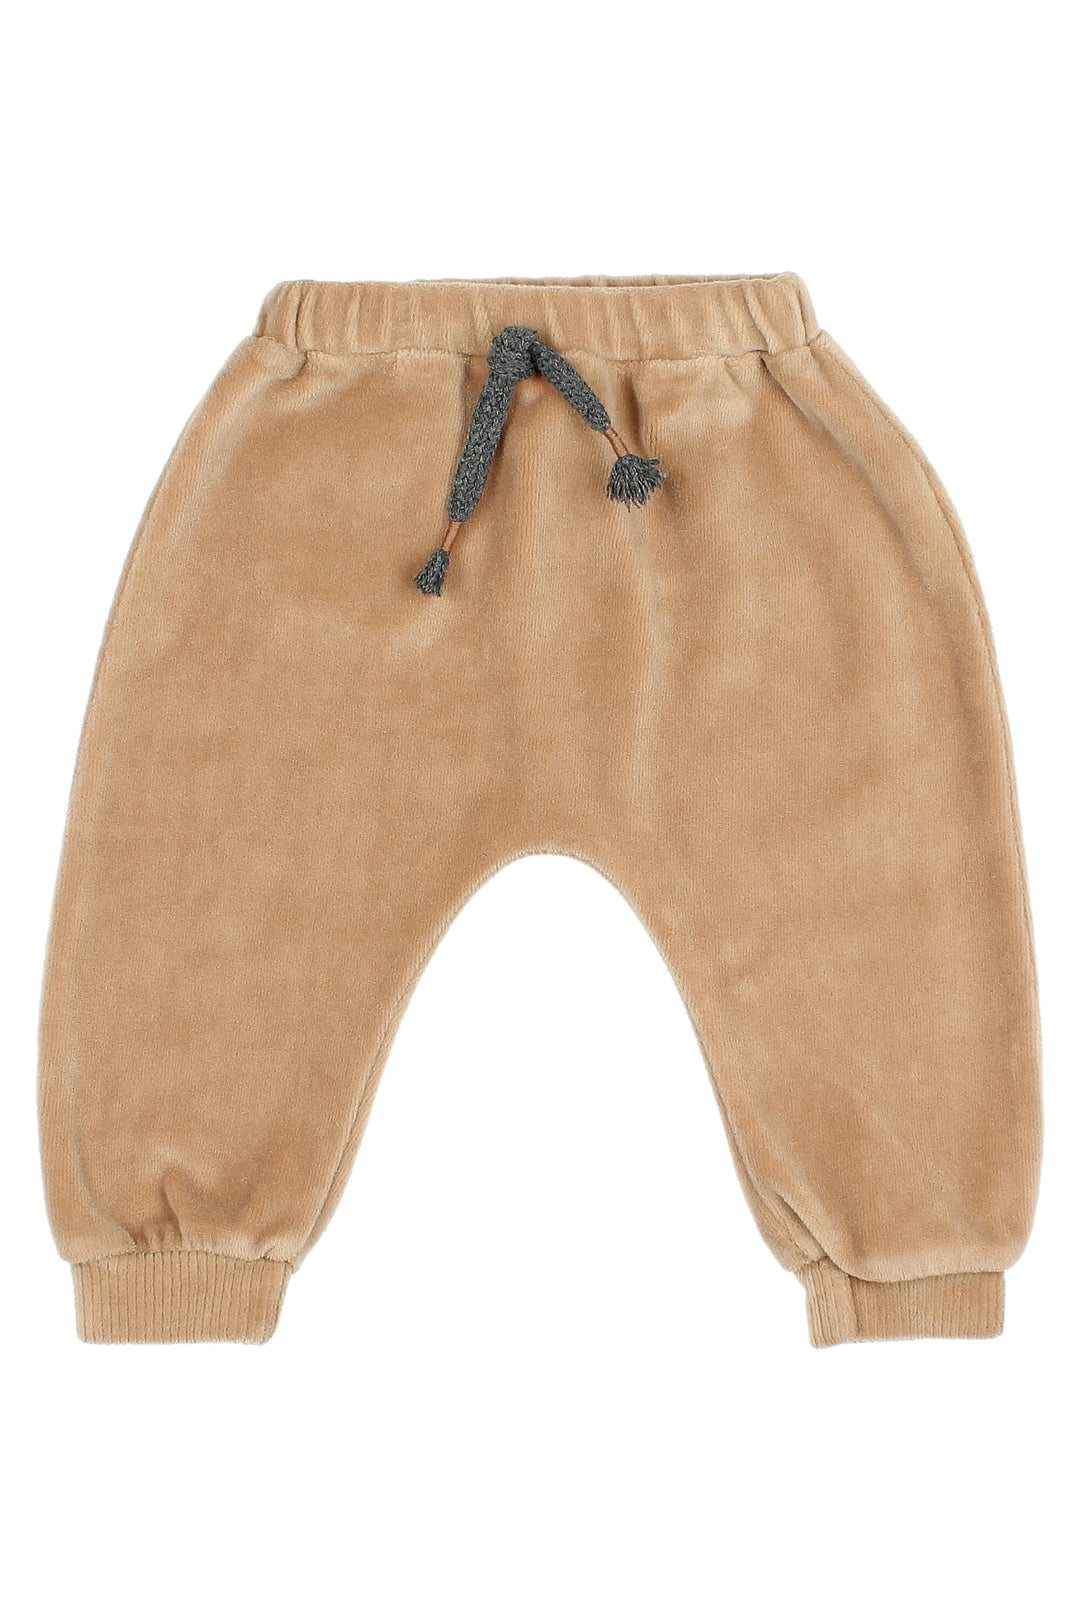 Búho "Channing" Sand Velour Trousers | Millie and John